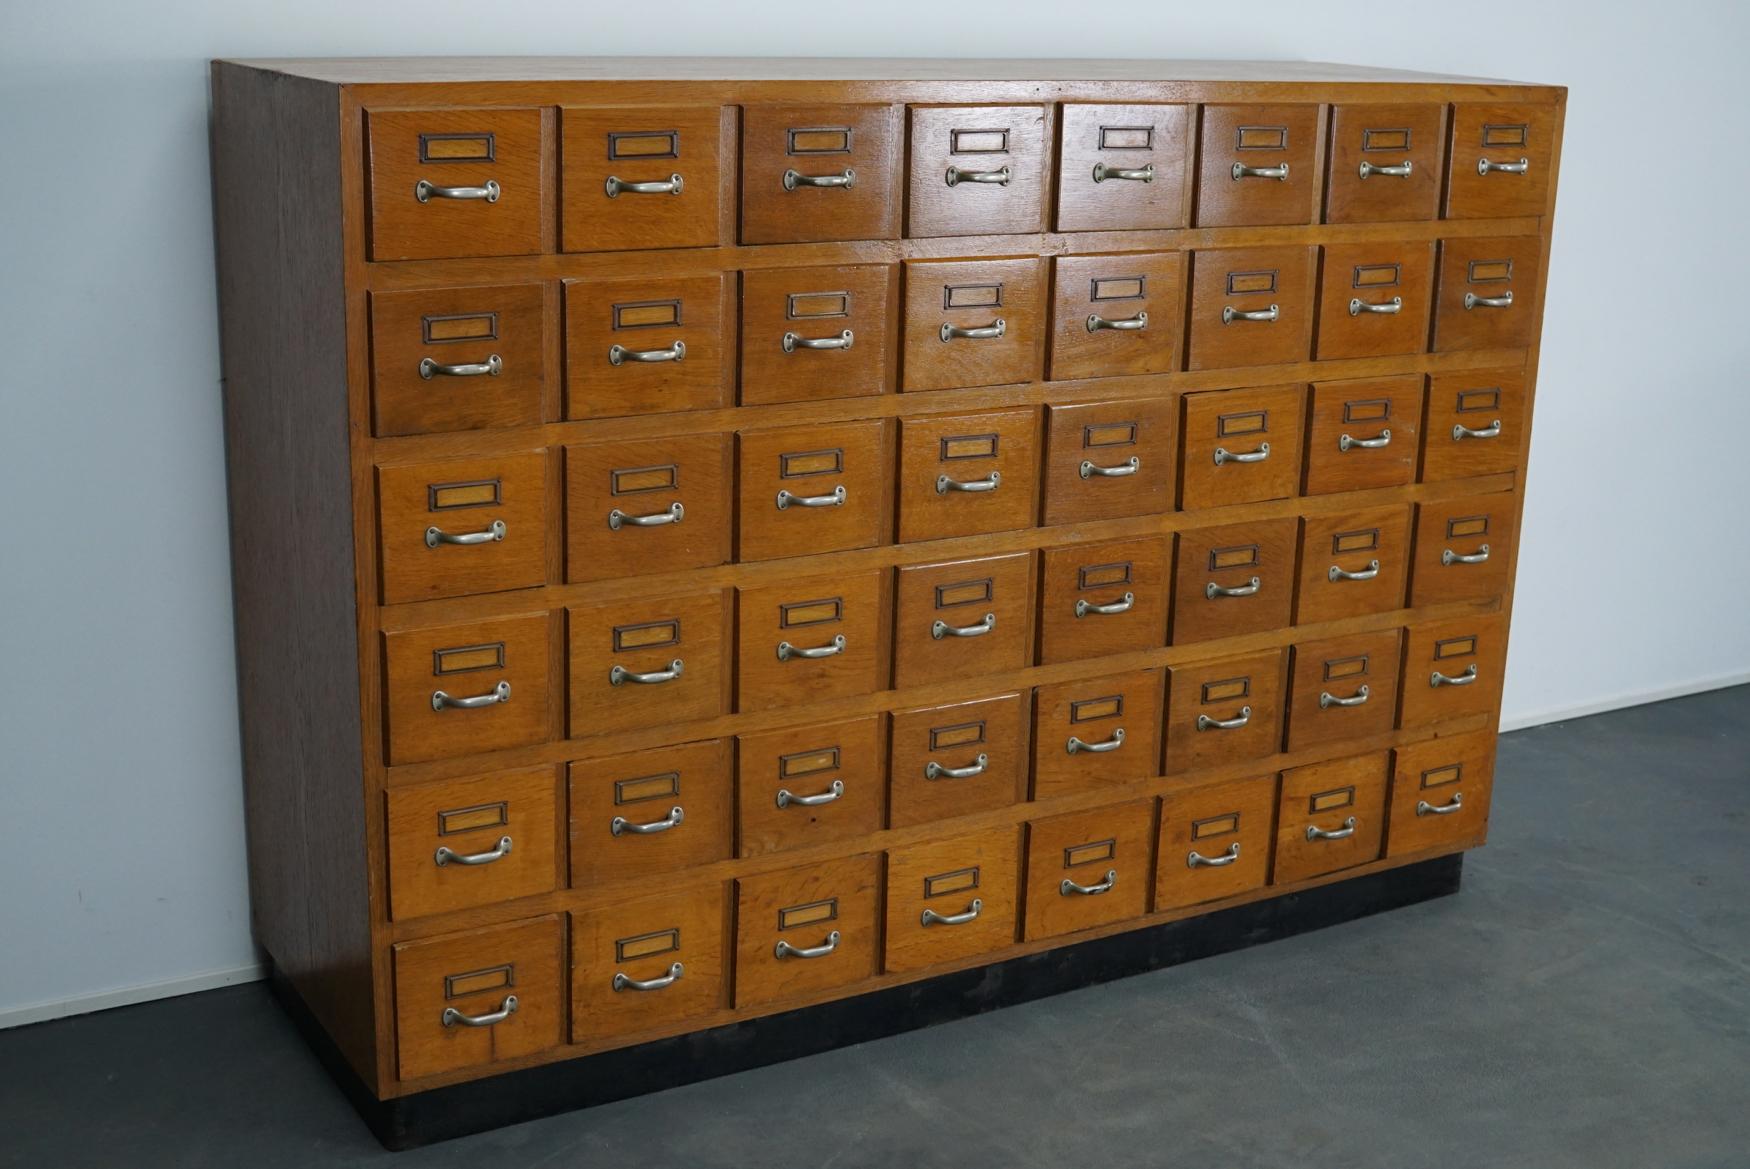 This apothecary cabinet was produced during the 1950s in Germany. This piece features 48 drawers with nice card holders and pulls. The interior dimensions of the drawers are: D x W x H 34 x 15.5 x 13 cm. The cabinet was used in a pharmacy in west